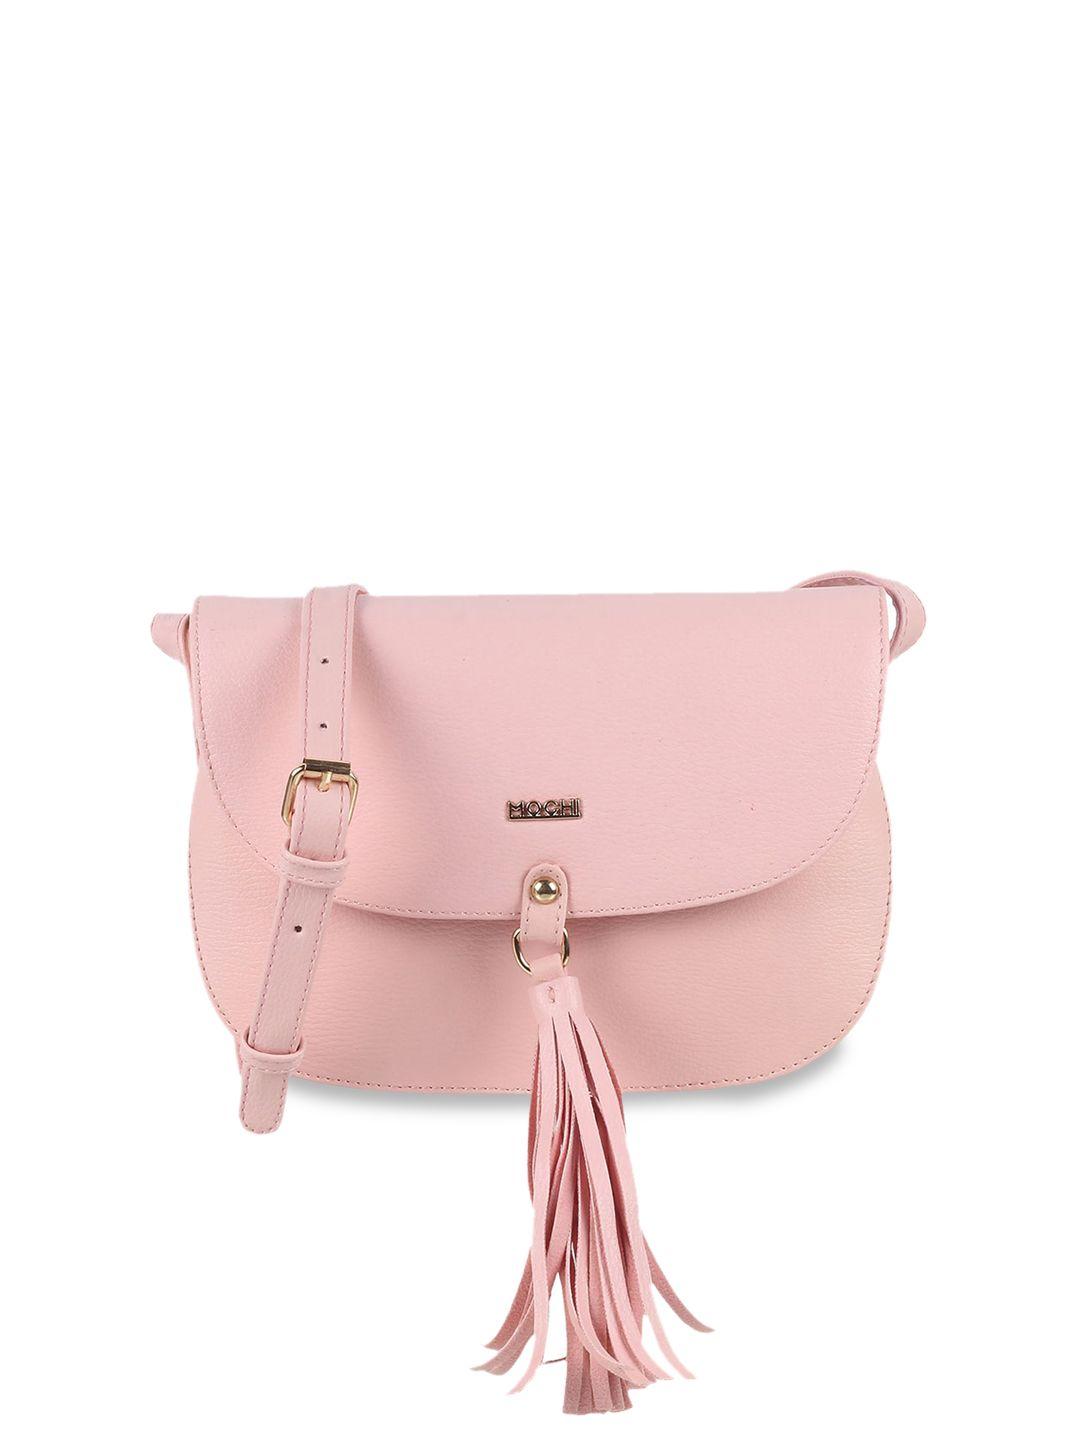 mochi textured structured sling bag with tasselled